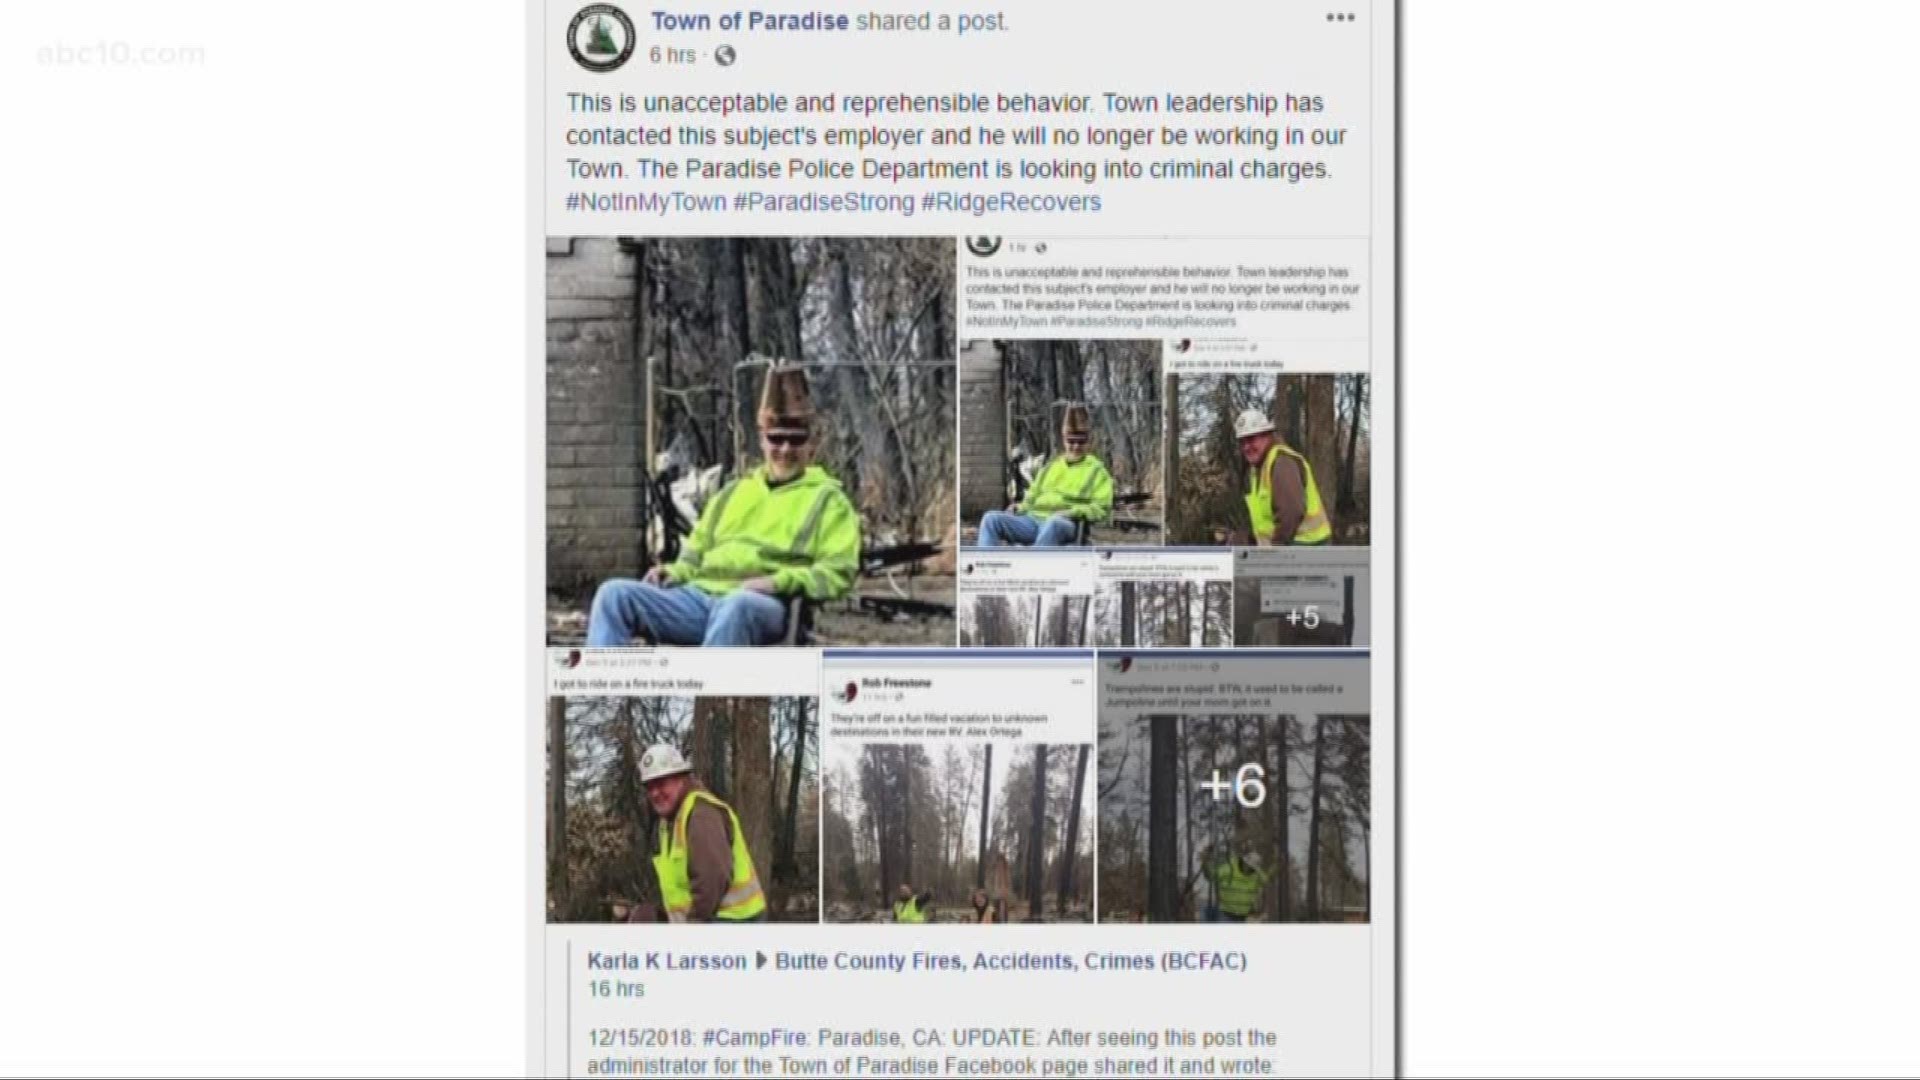 Authorities are investigating after offensive photos surfaced showing a crane operator disrespecting fire victims' property in Paradise. The photos were first brought to the attention of officials with the Town of Paradise after the crane operator, identi